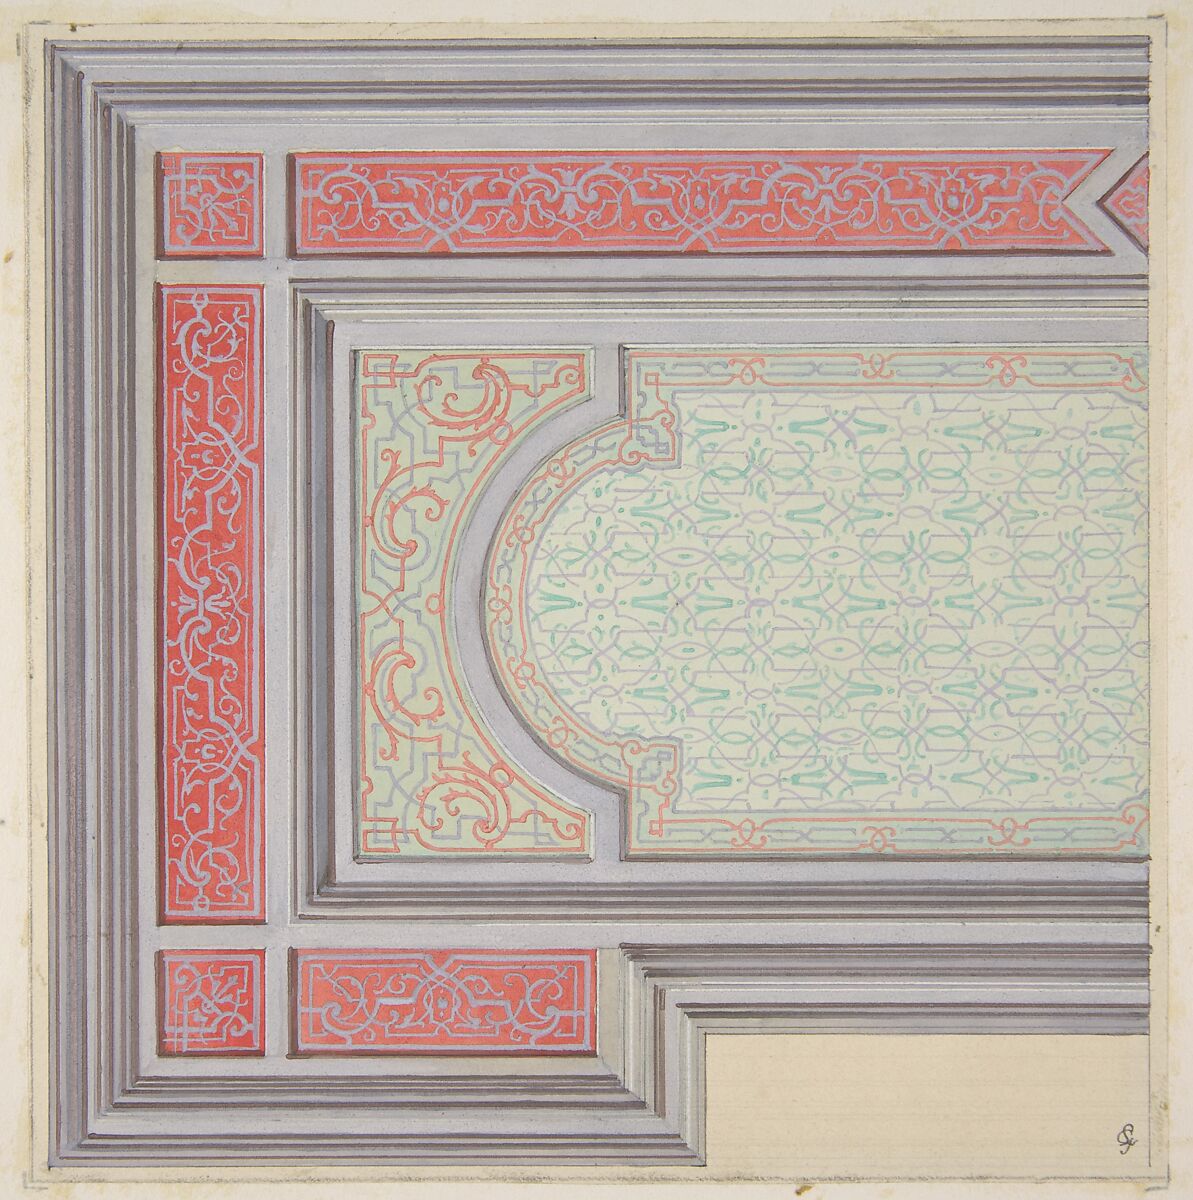 Design for the decoration of a ceiling in strapwork and rinceaux, Jules-Edmond-Charles Lachaise (French, died 1897), pen and ink and watercolor on wove paper, mounted on heavy wove paper 